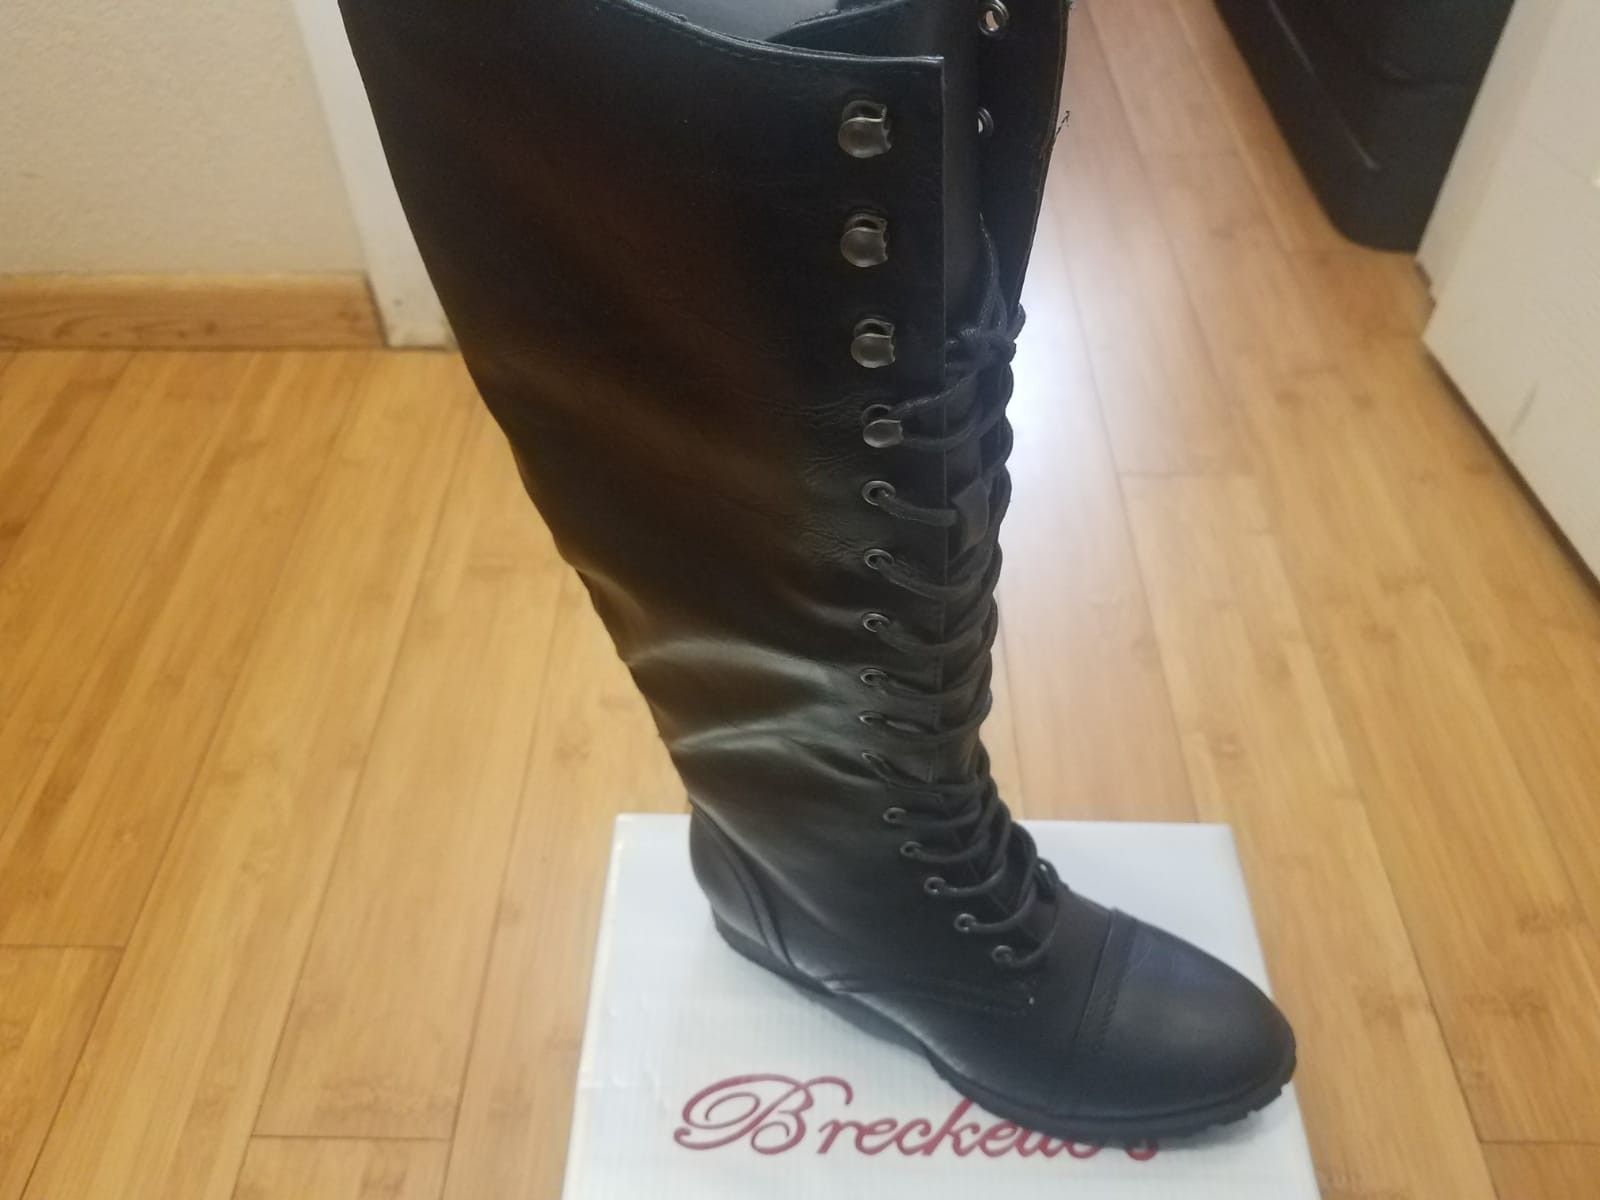 Breckelles Combat Boots size 5.5 and 6 for women